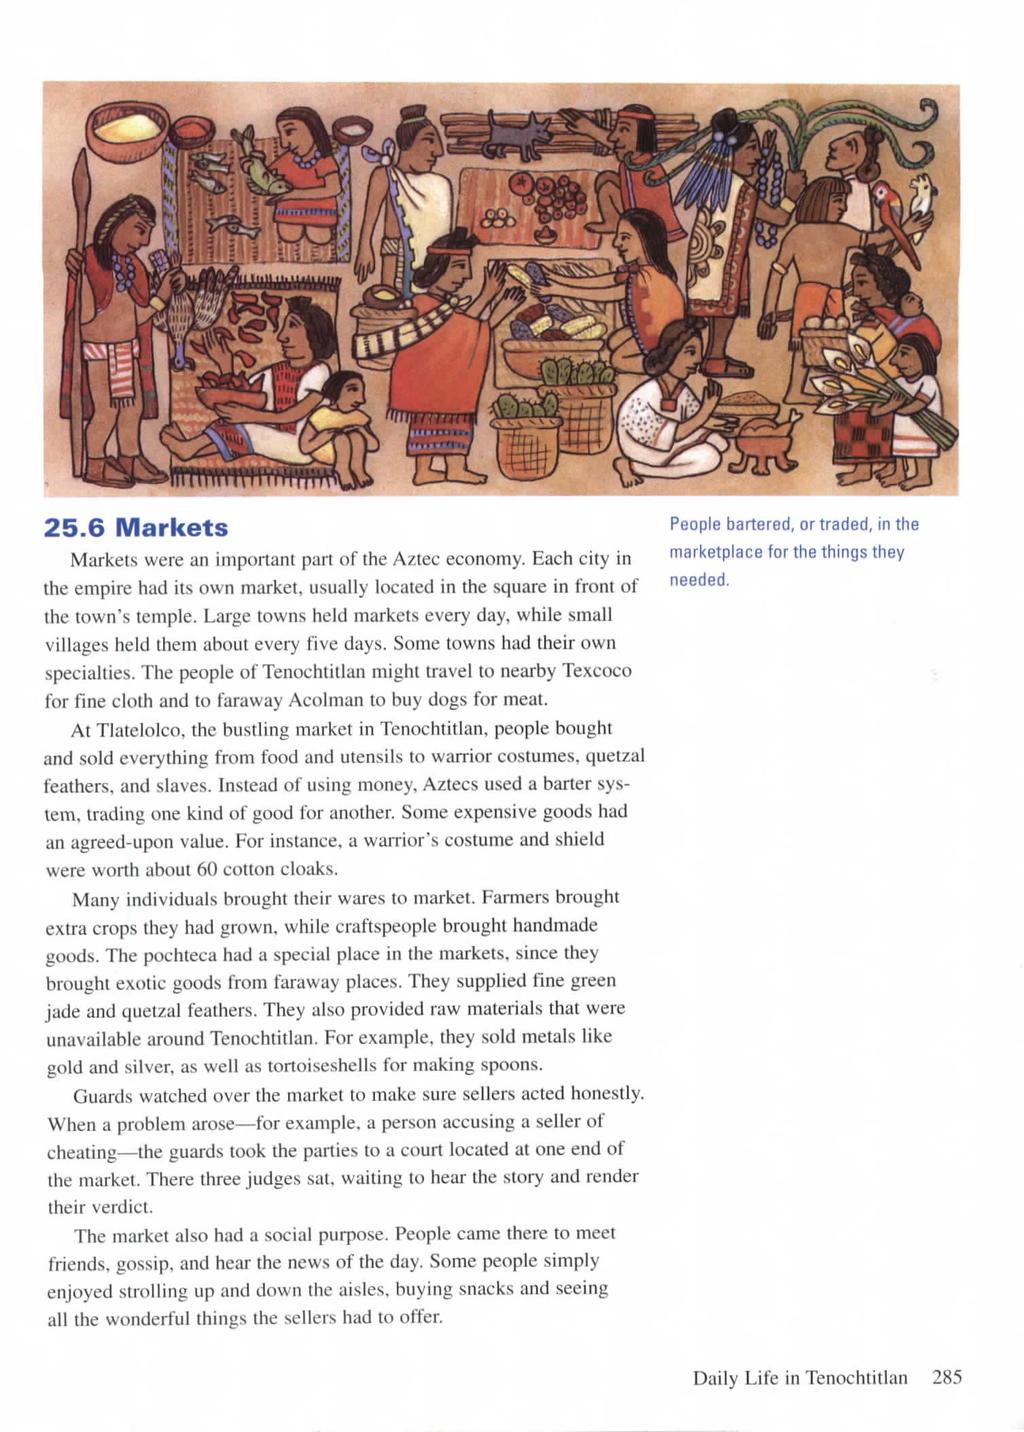 25.6 Markets Markets were an important part of the Aztec economy. Each city in the empire had its own market, usually located in the square in front of the town's temple.